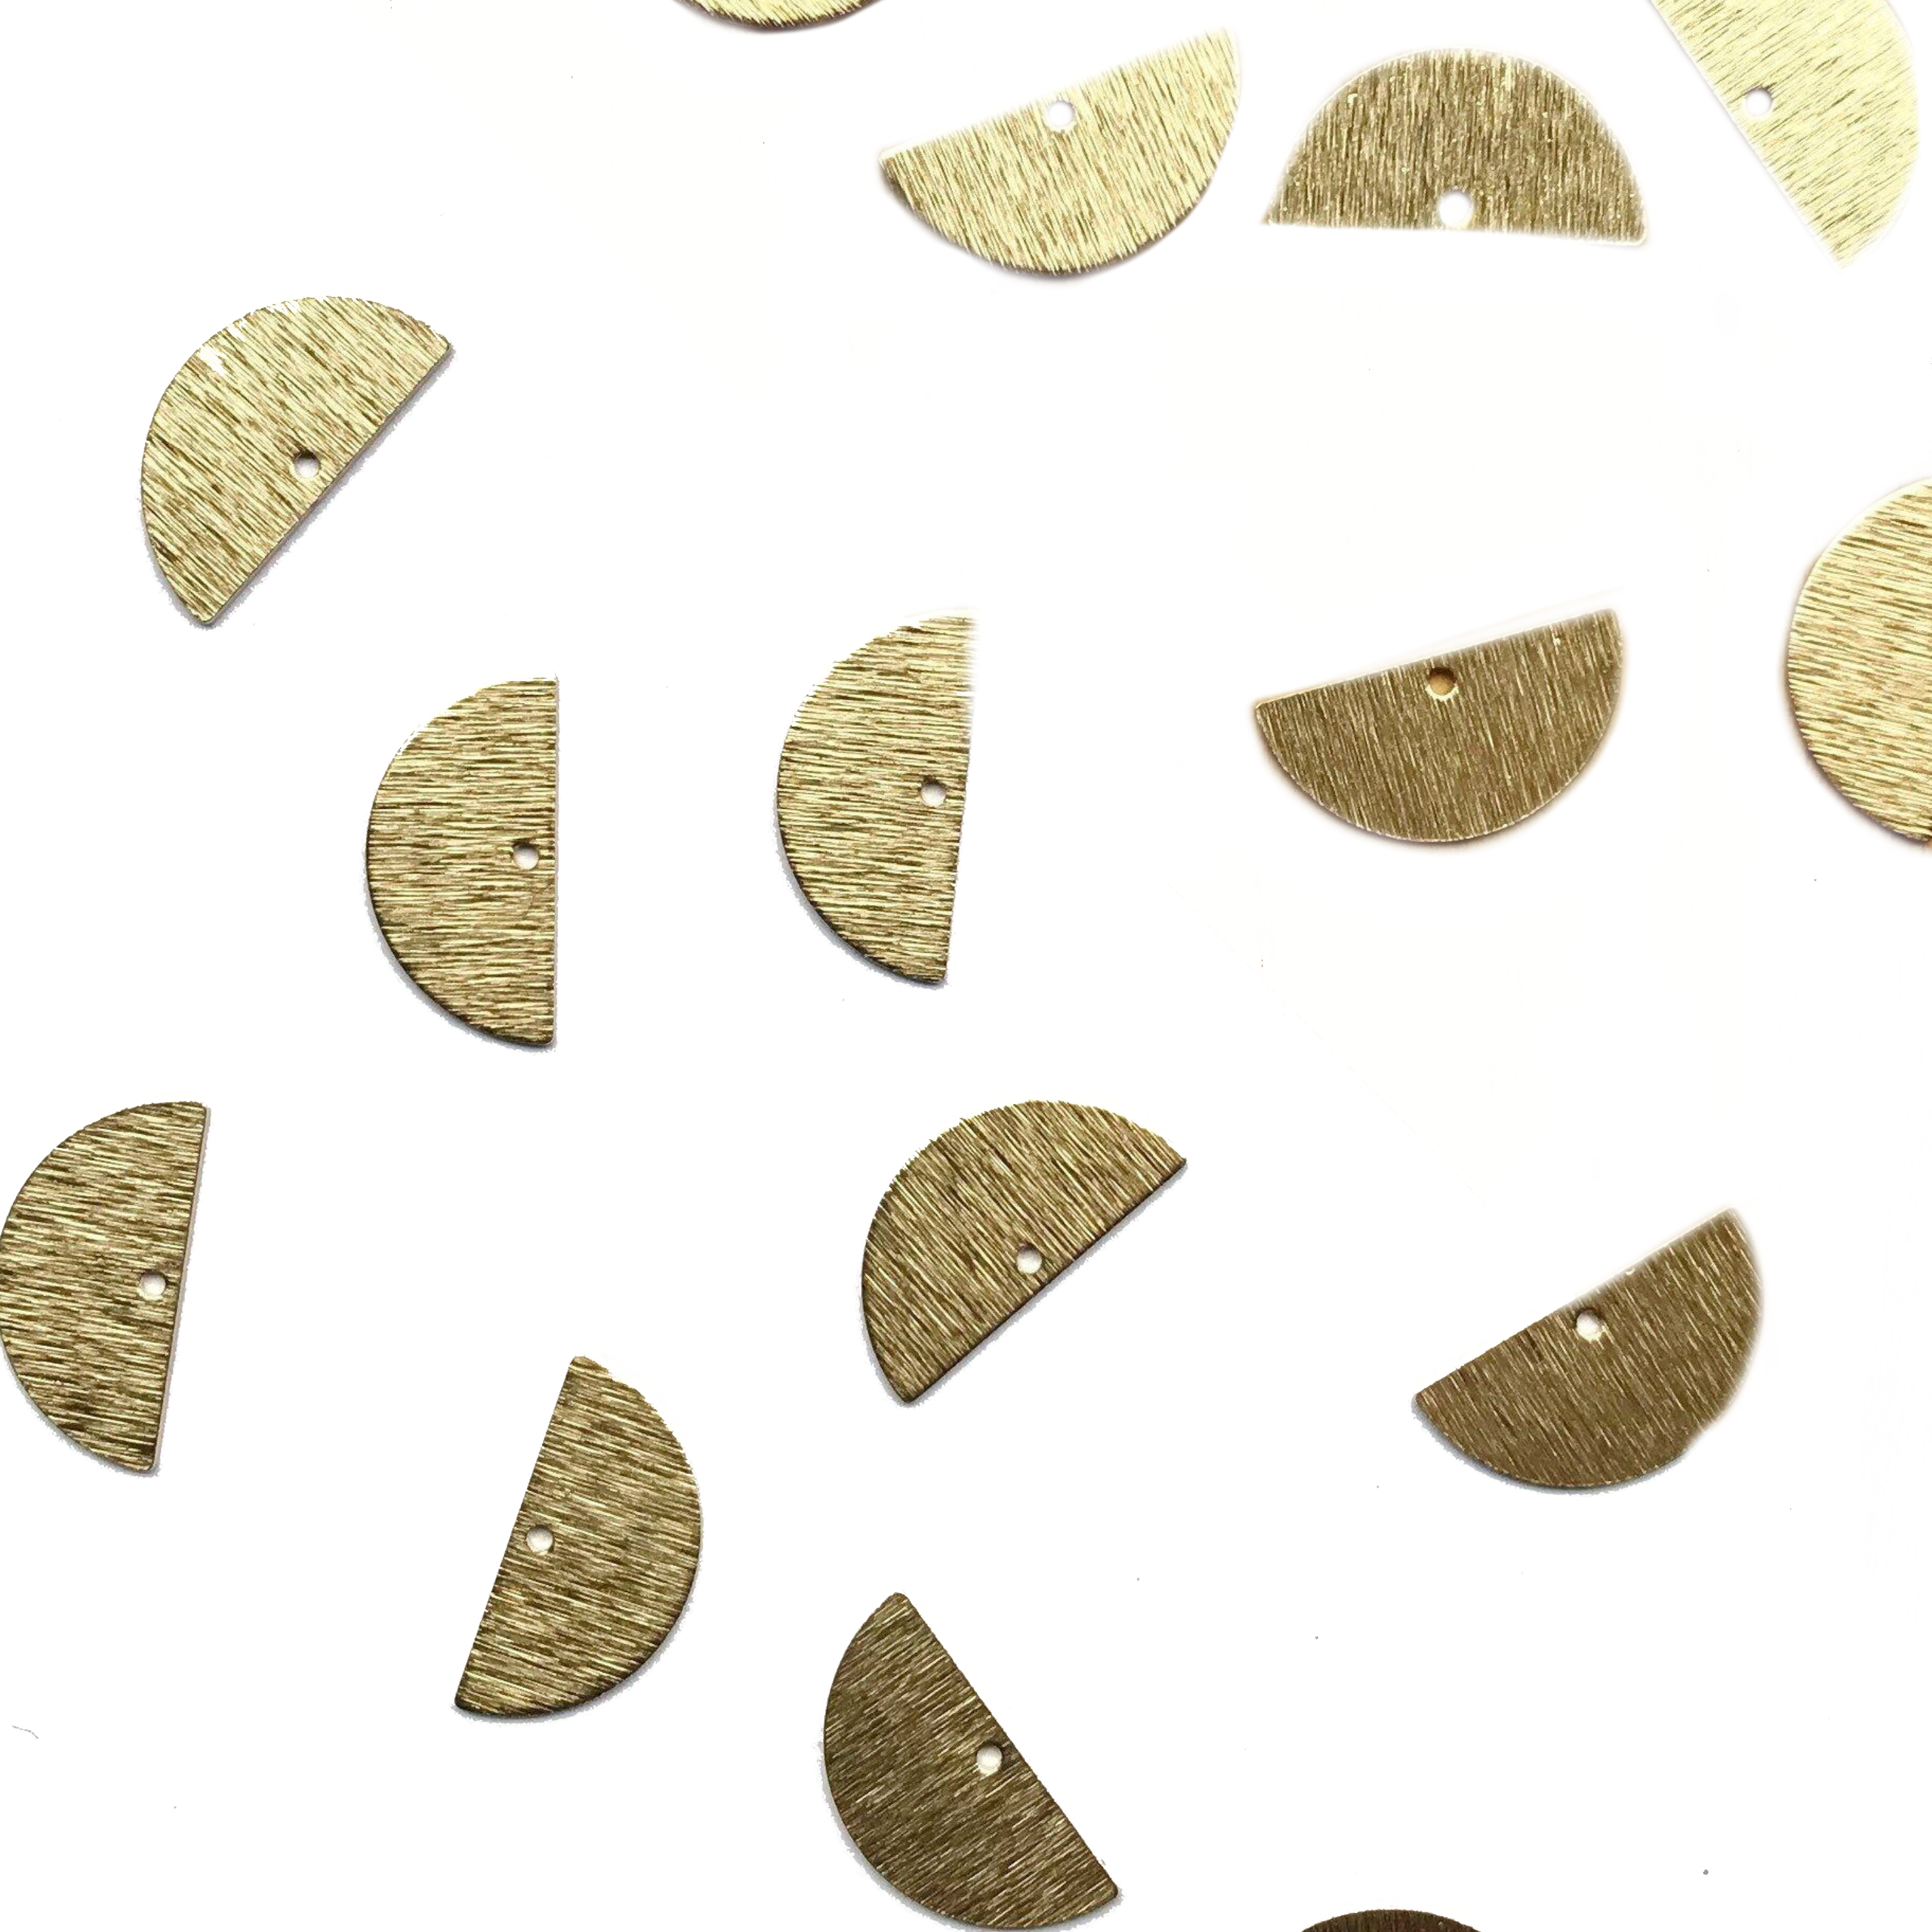 Brass Half Moon Textured Charms - 8 pieces